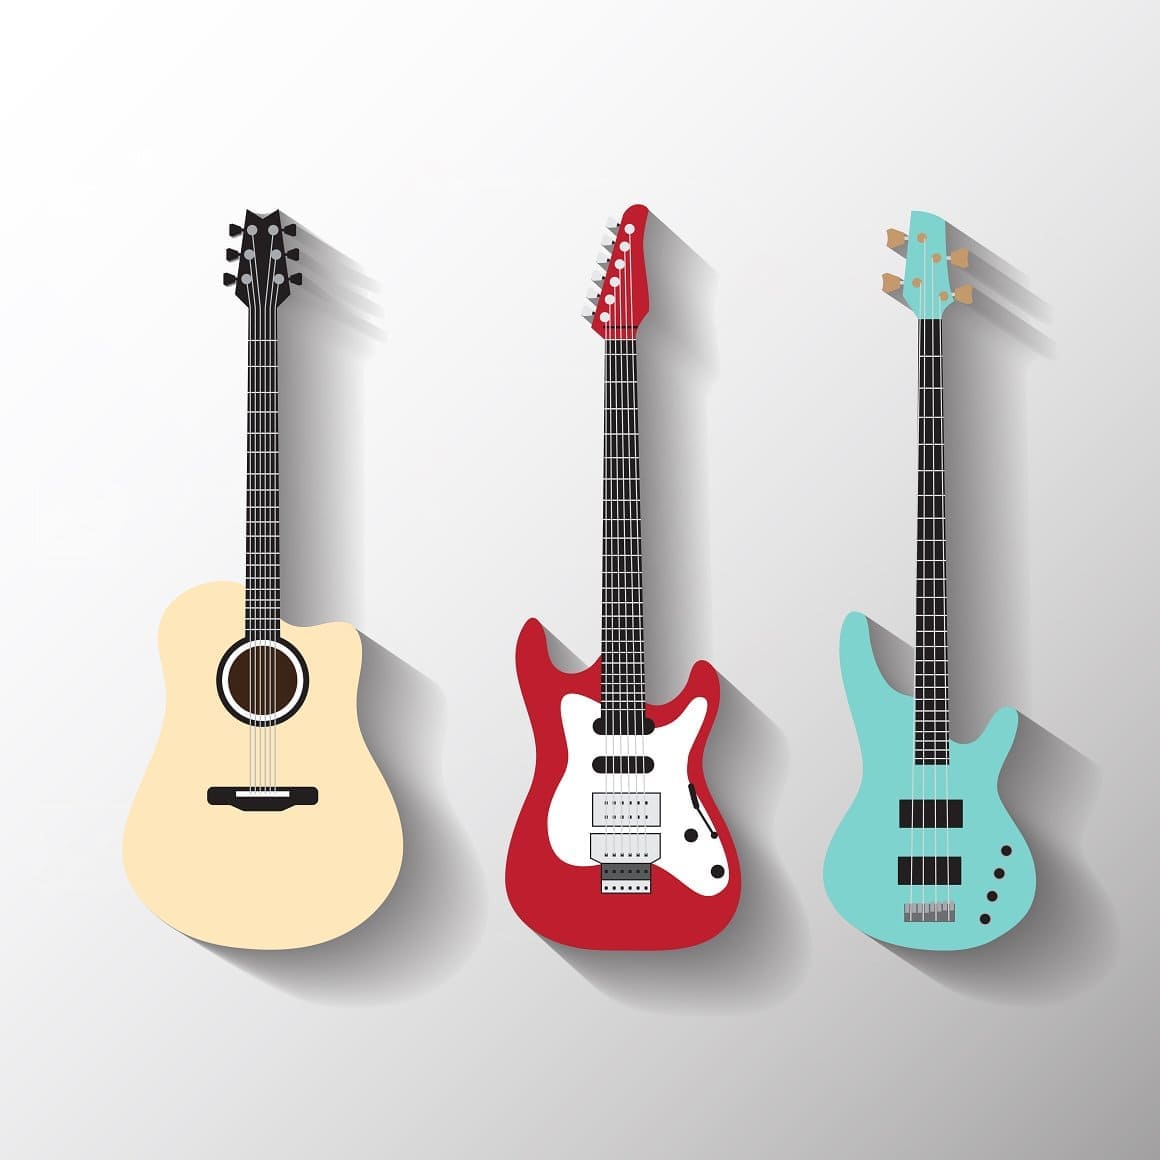 Three different guitars on a white background with shadows.